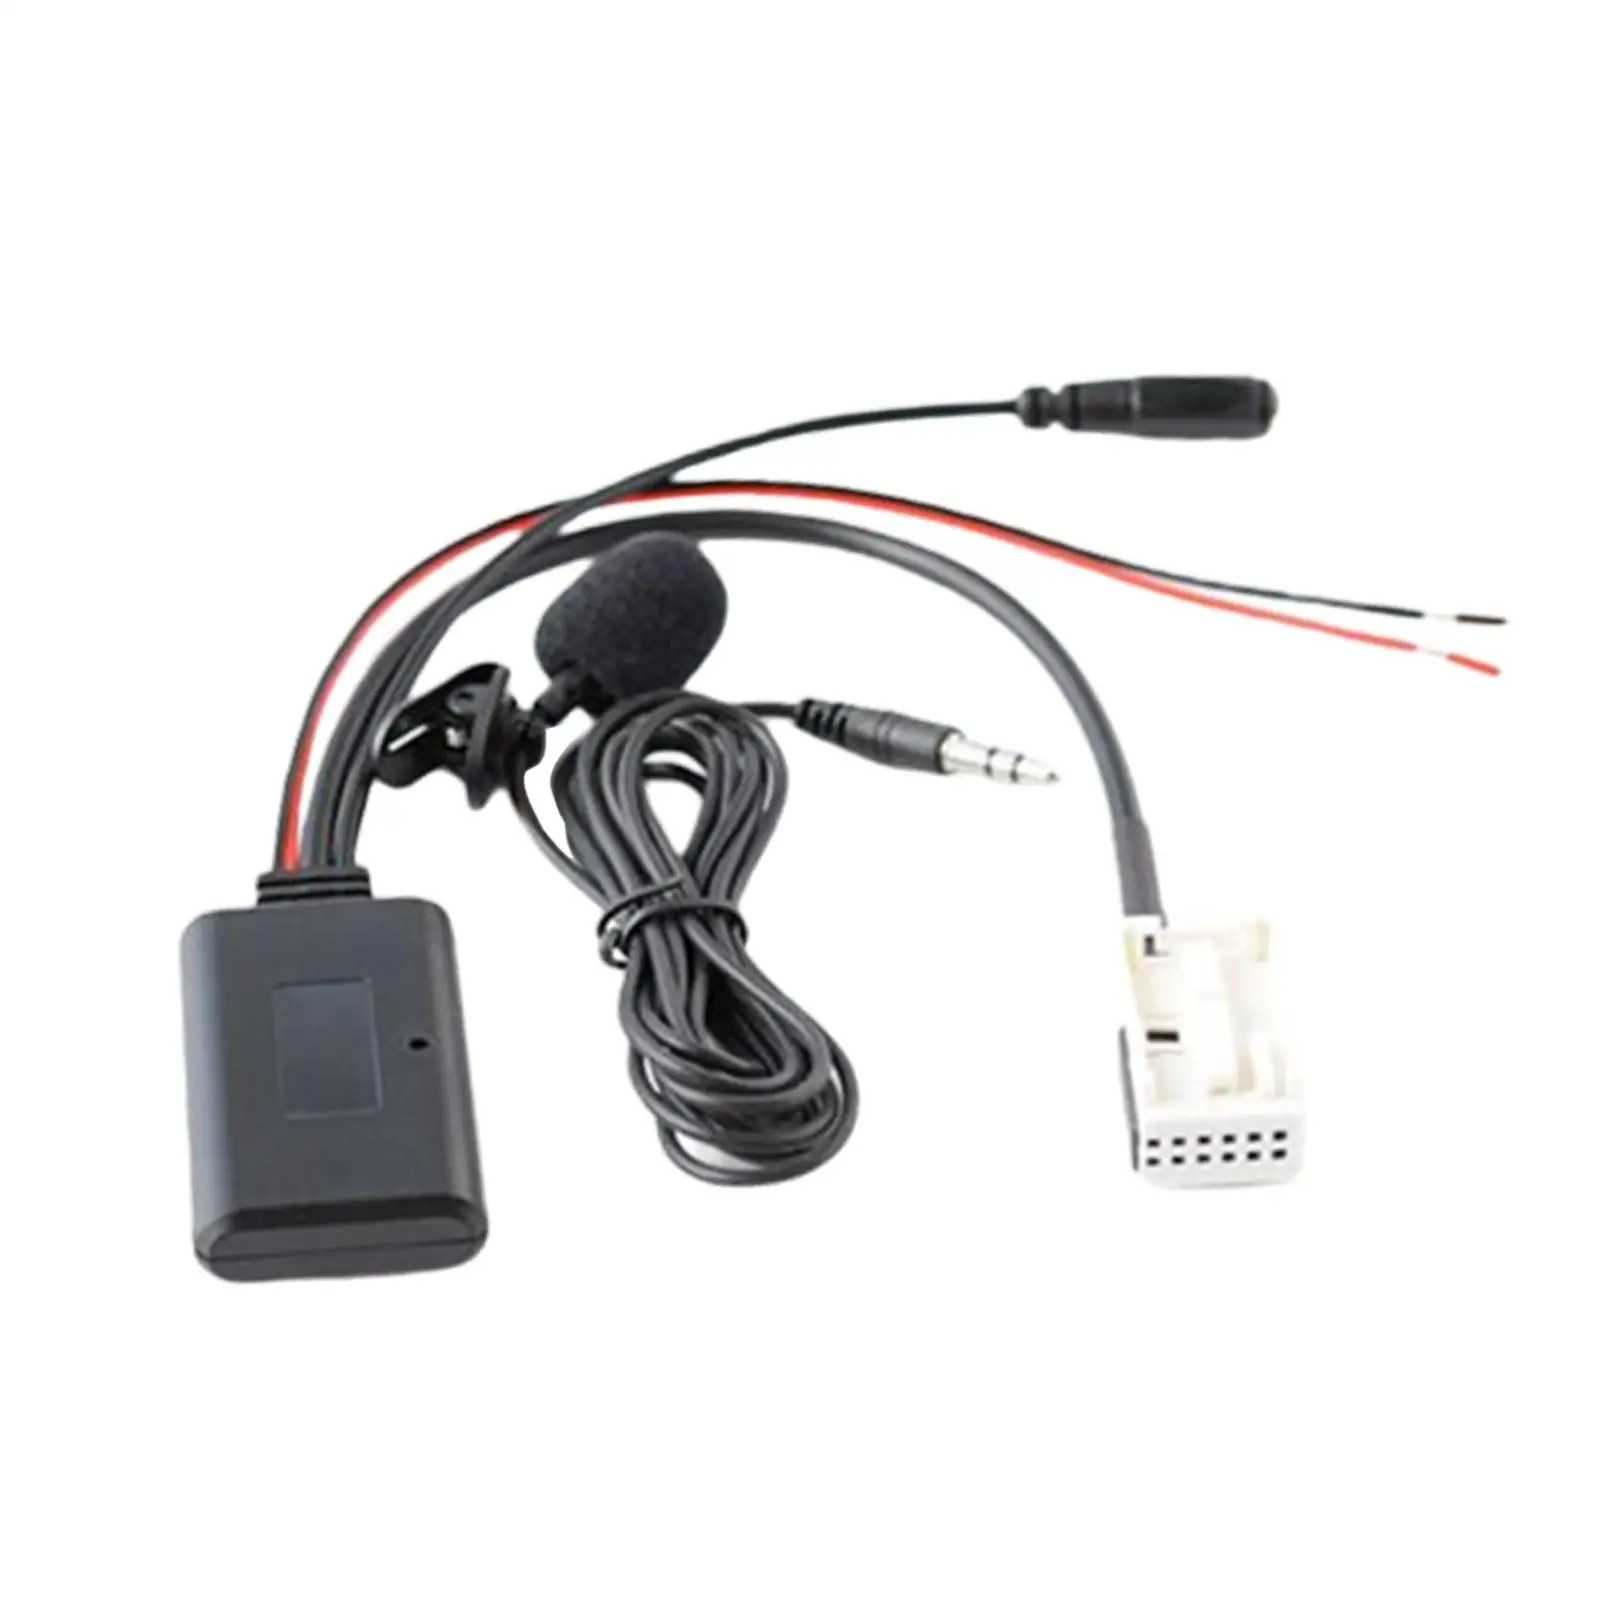 Car Bluetooth 5.0 Audio Adapter Handsfree Device for RCD310 RCD510 RNS510